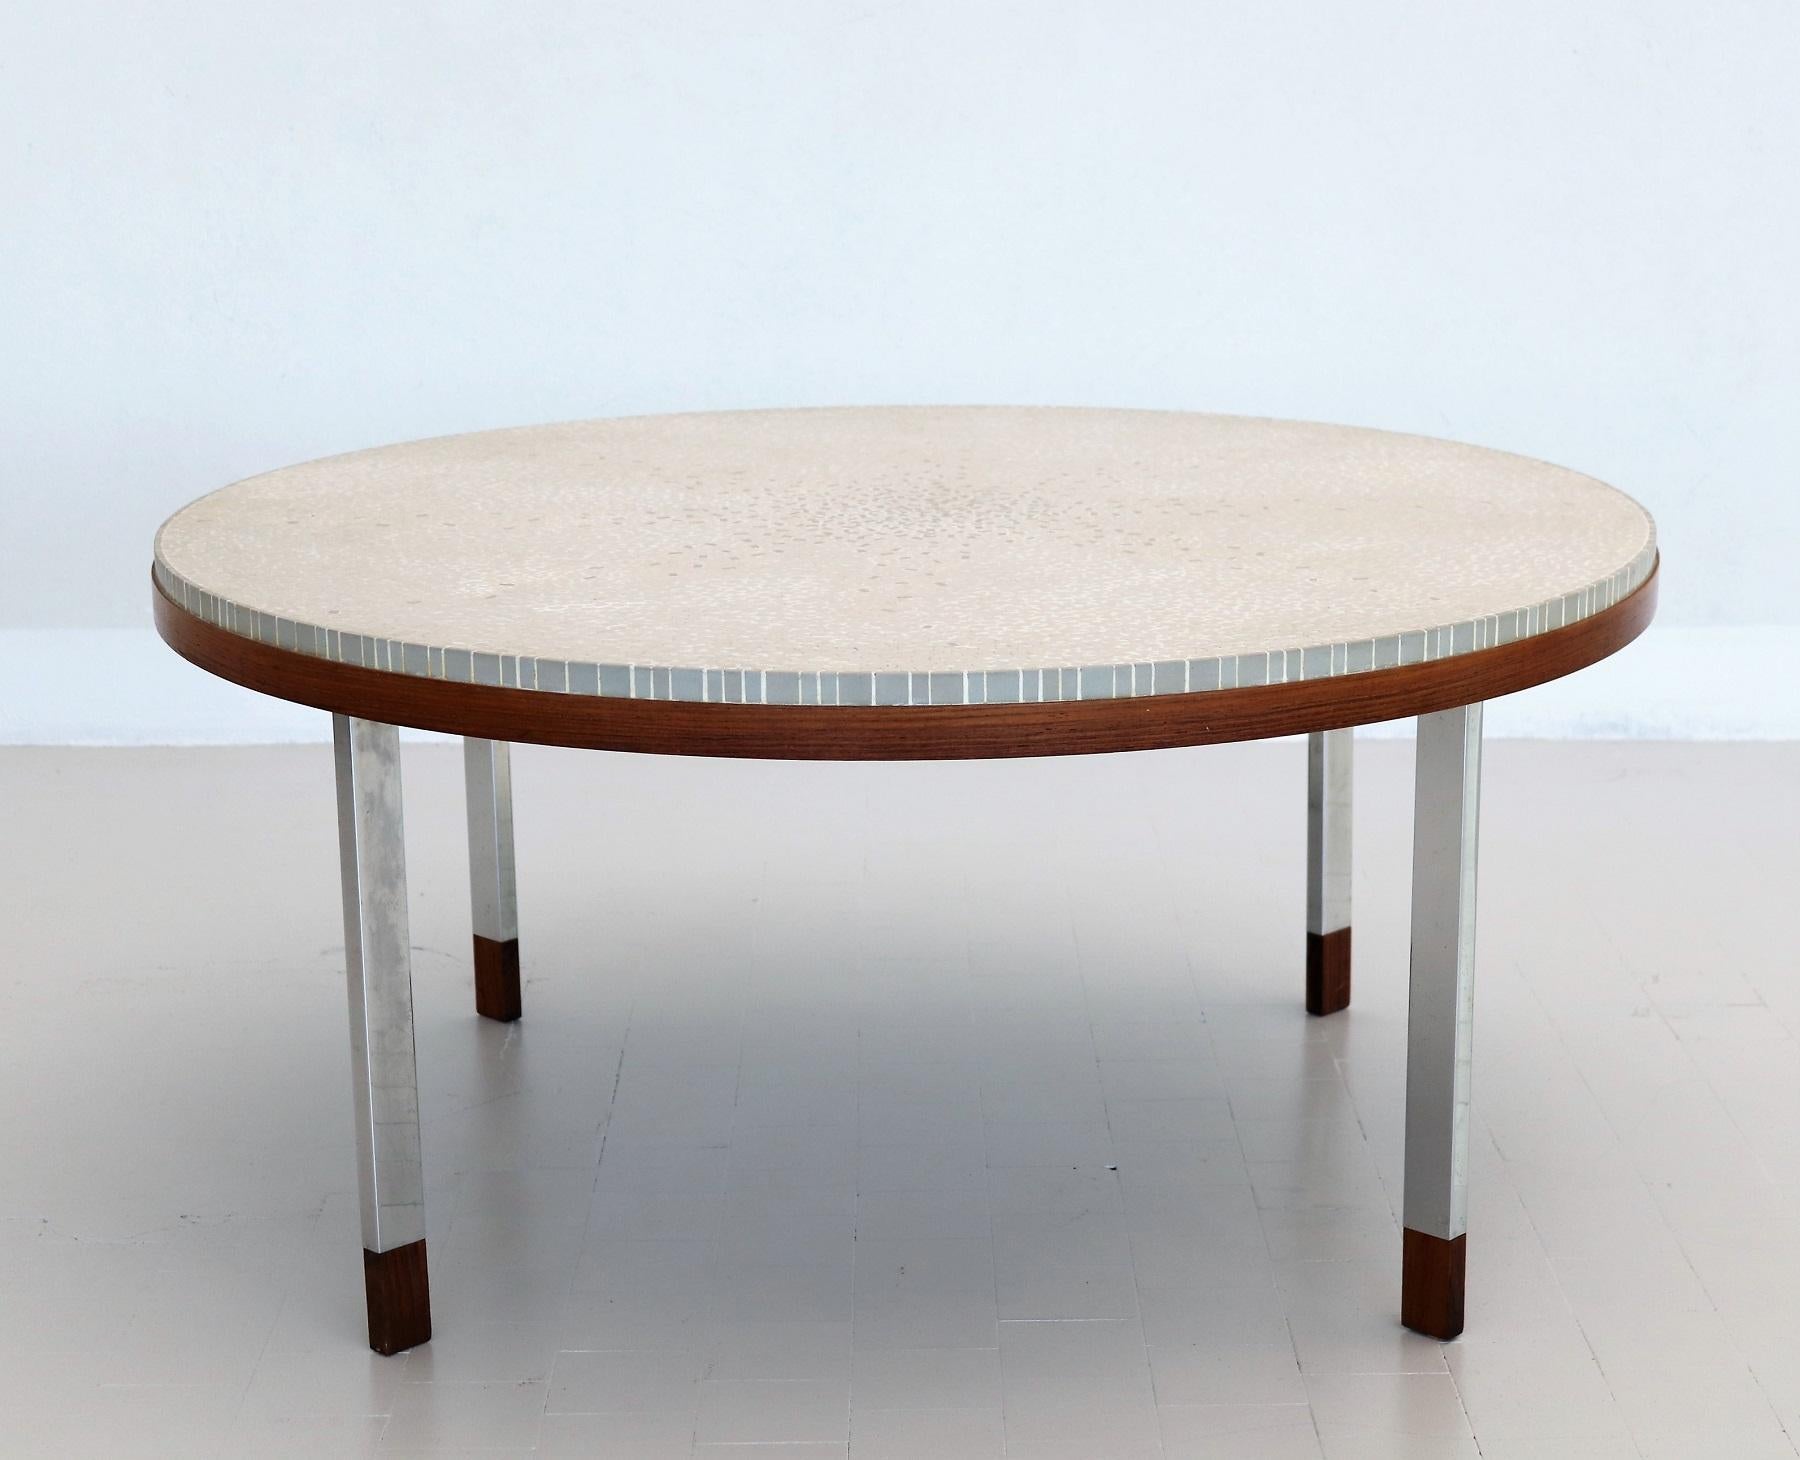 Gorgeous coffee table with big Mosaic plate with white-off and grey tiles on strong teak table base.
Made in Germany in the 1960s by Berthold Müller, Oerlighausen.
The Mosaic as well as the teak base are in original very good condition with small